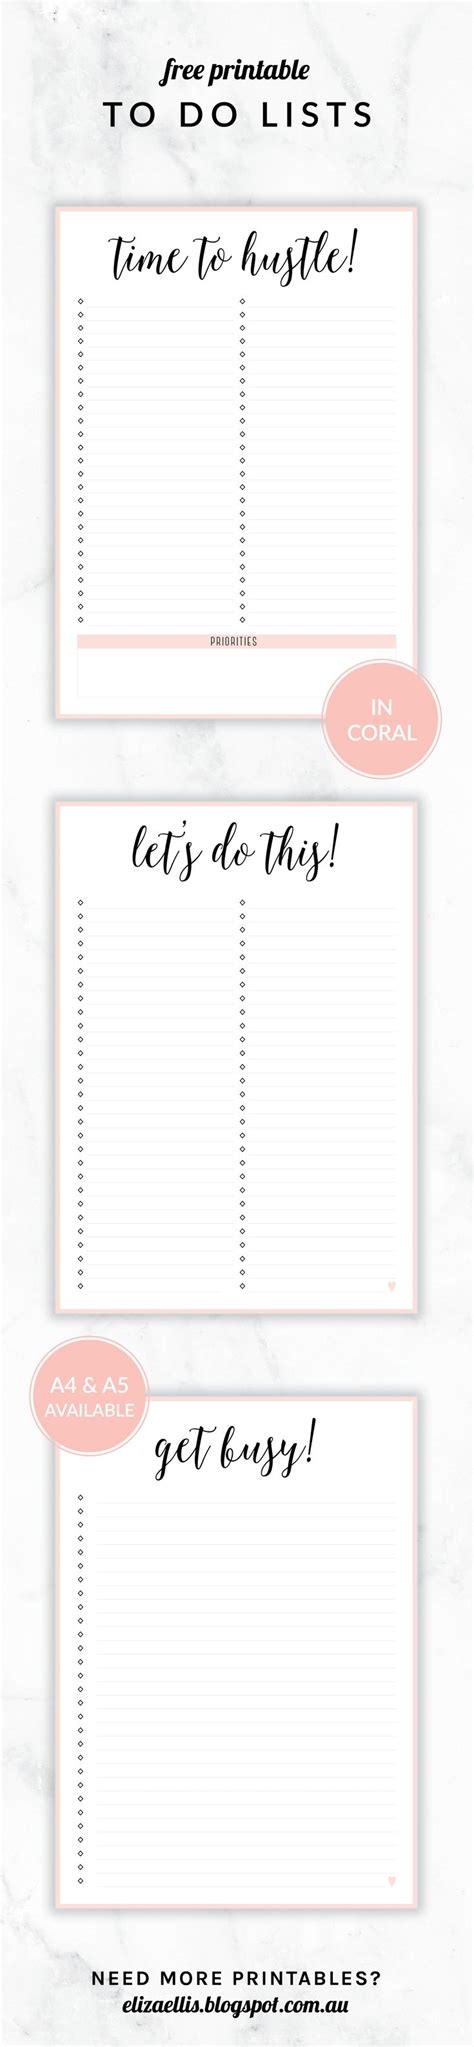 Eliza Ellis Free Printable Irma To Do Lists Available In Designs Colors And In Both A